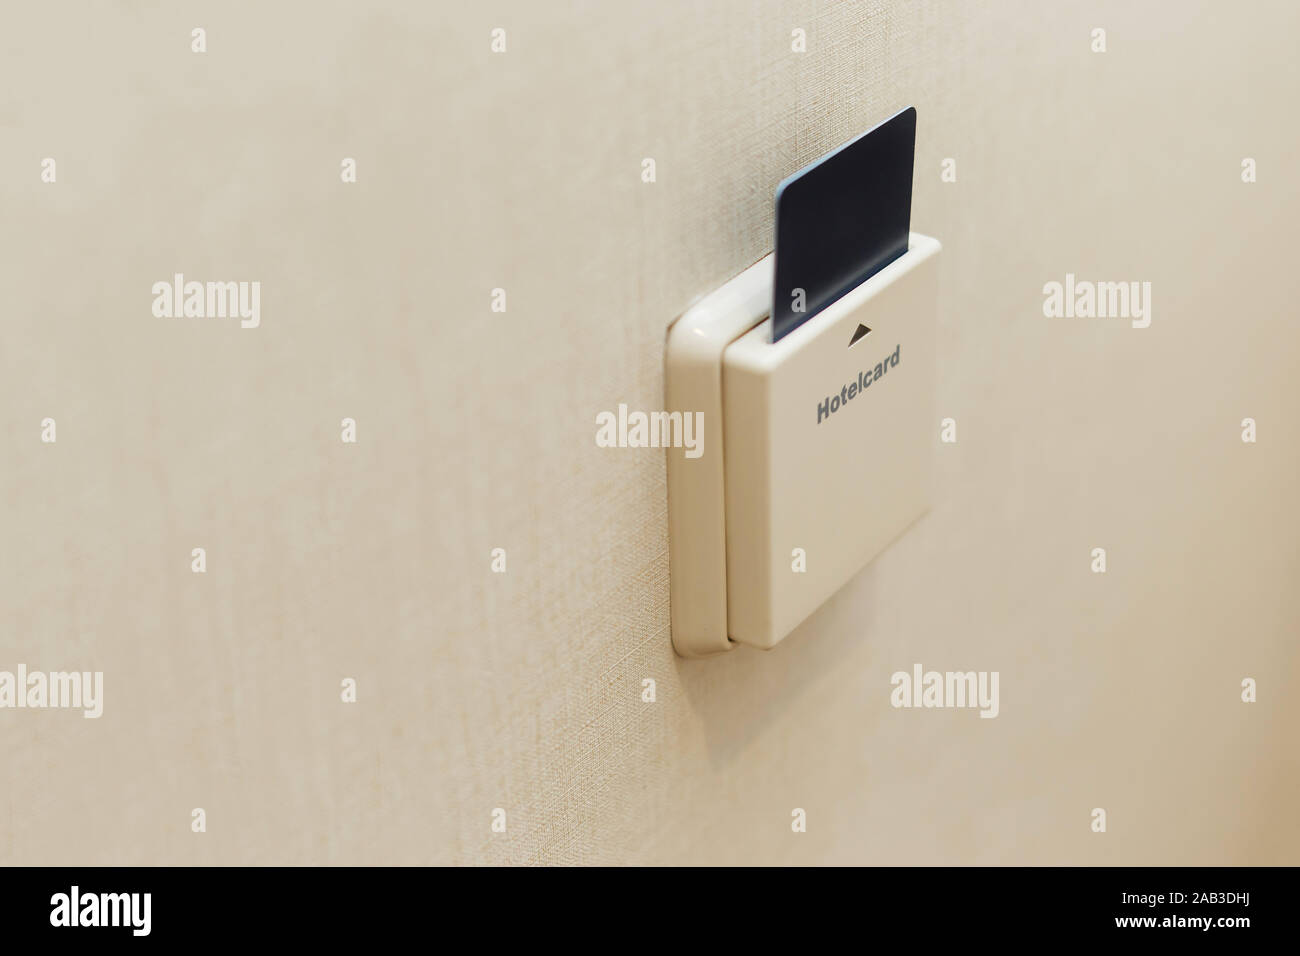 Electronic lock with card inserted and light switches on wall in hotel room Stock Photo